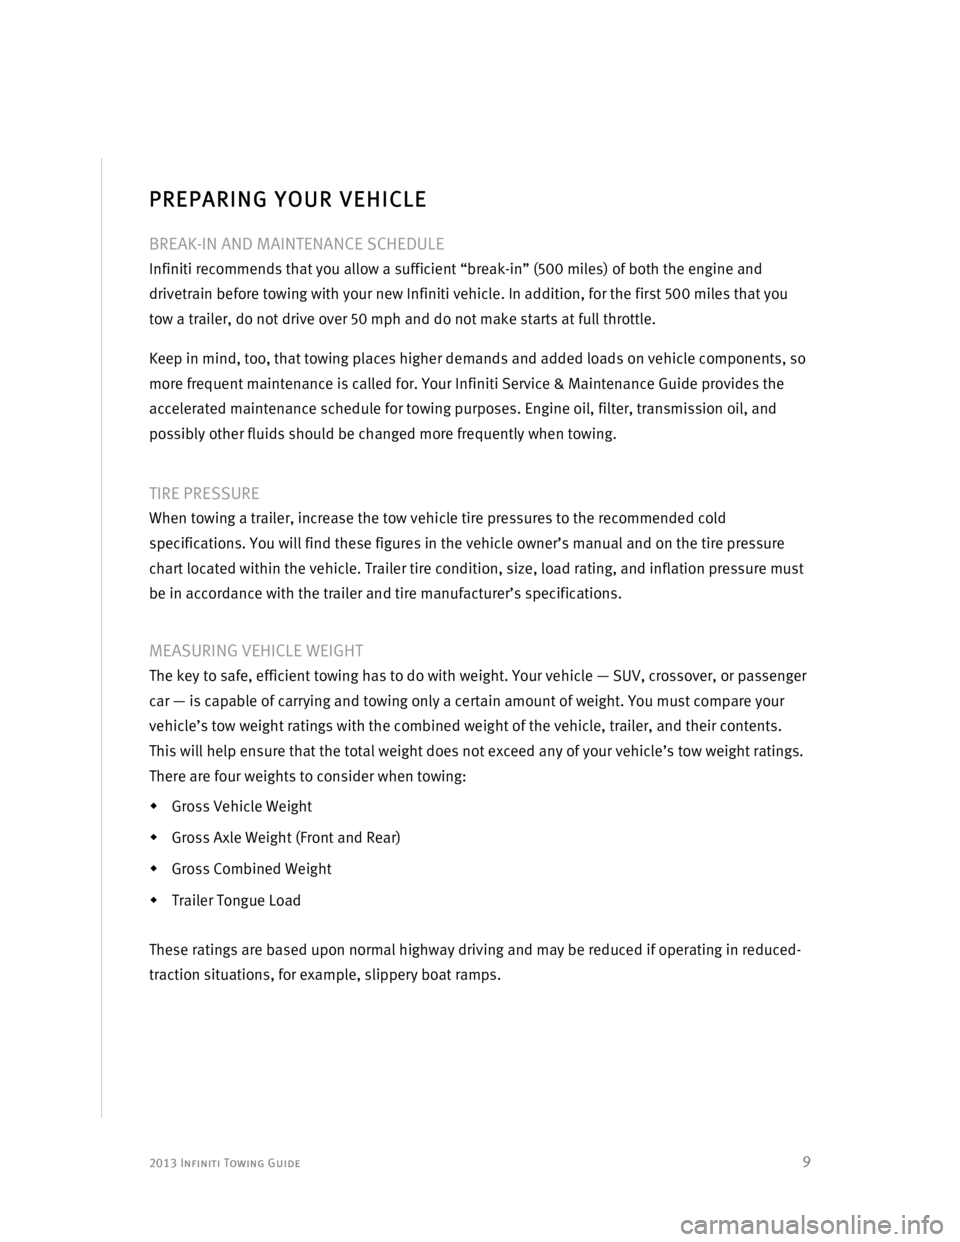 INFINITI EX 2013  Towing Guide  2013 Infiniti Towing Guide  
 9 
  
PREPARING YOUR VEHICLE 
 
BREAK-IN AND MAINTENANCE SCHEDULE 
Infiniti recommends that you allow a sufficient “break-in” (500 miles) of both the engine and 
dri